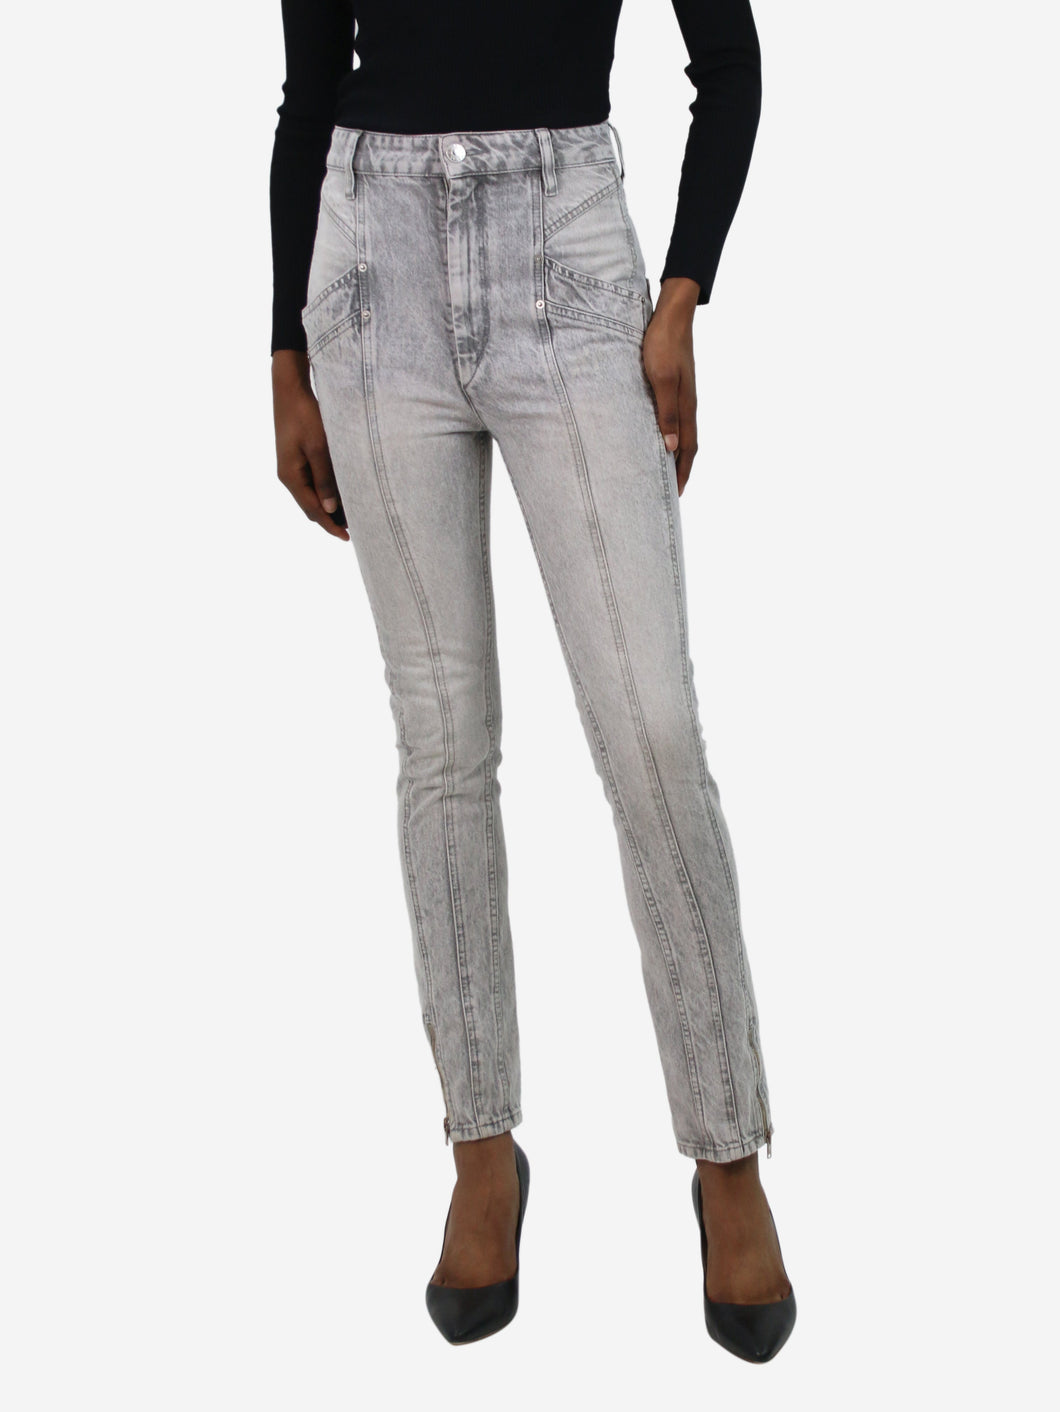 Grey panelled jeans - size FR 34 Trousers Isabel Marant 